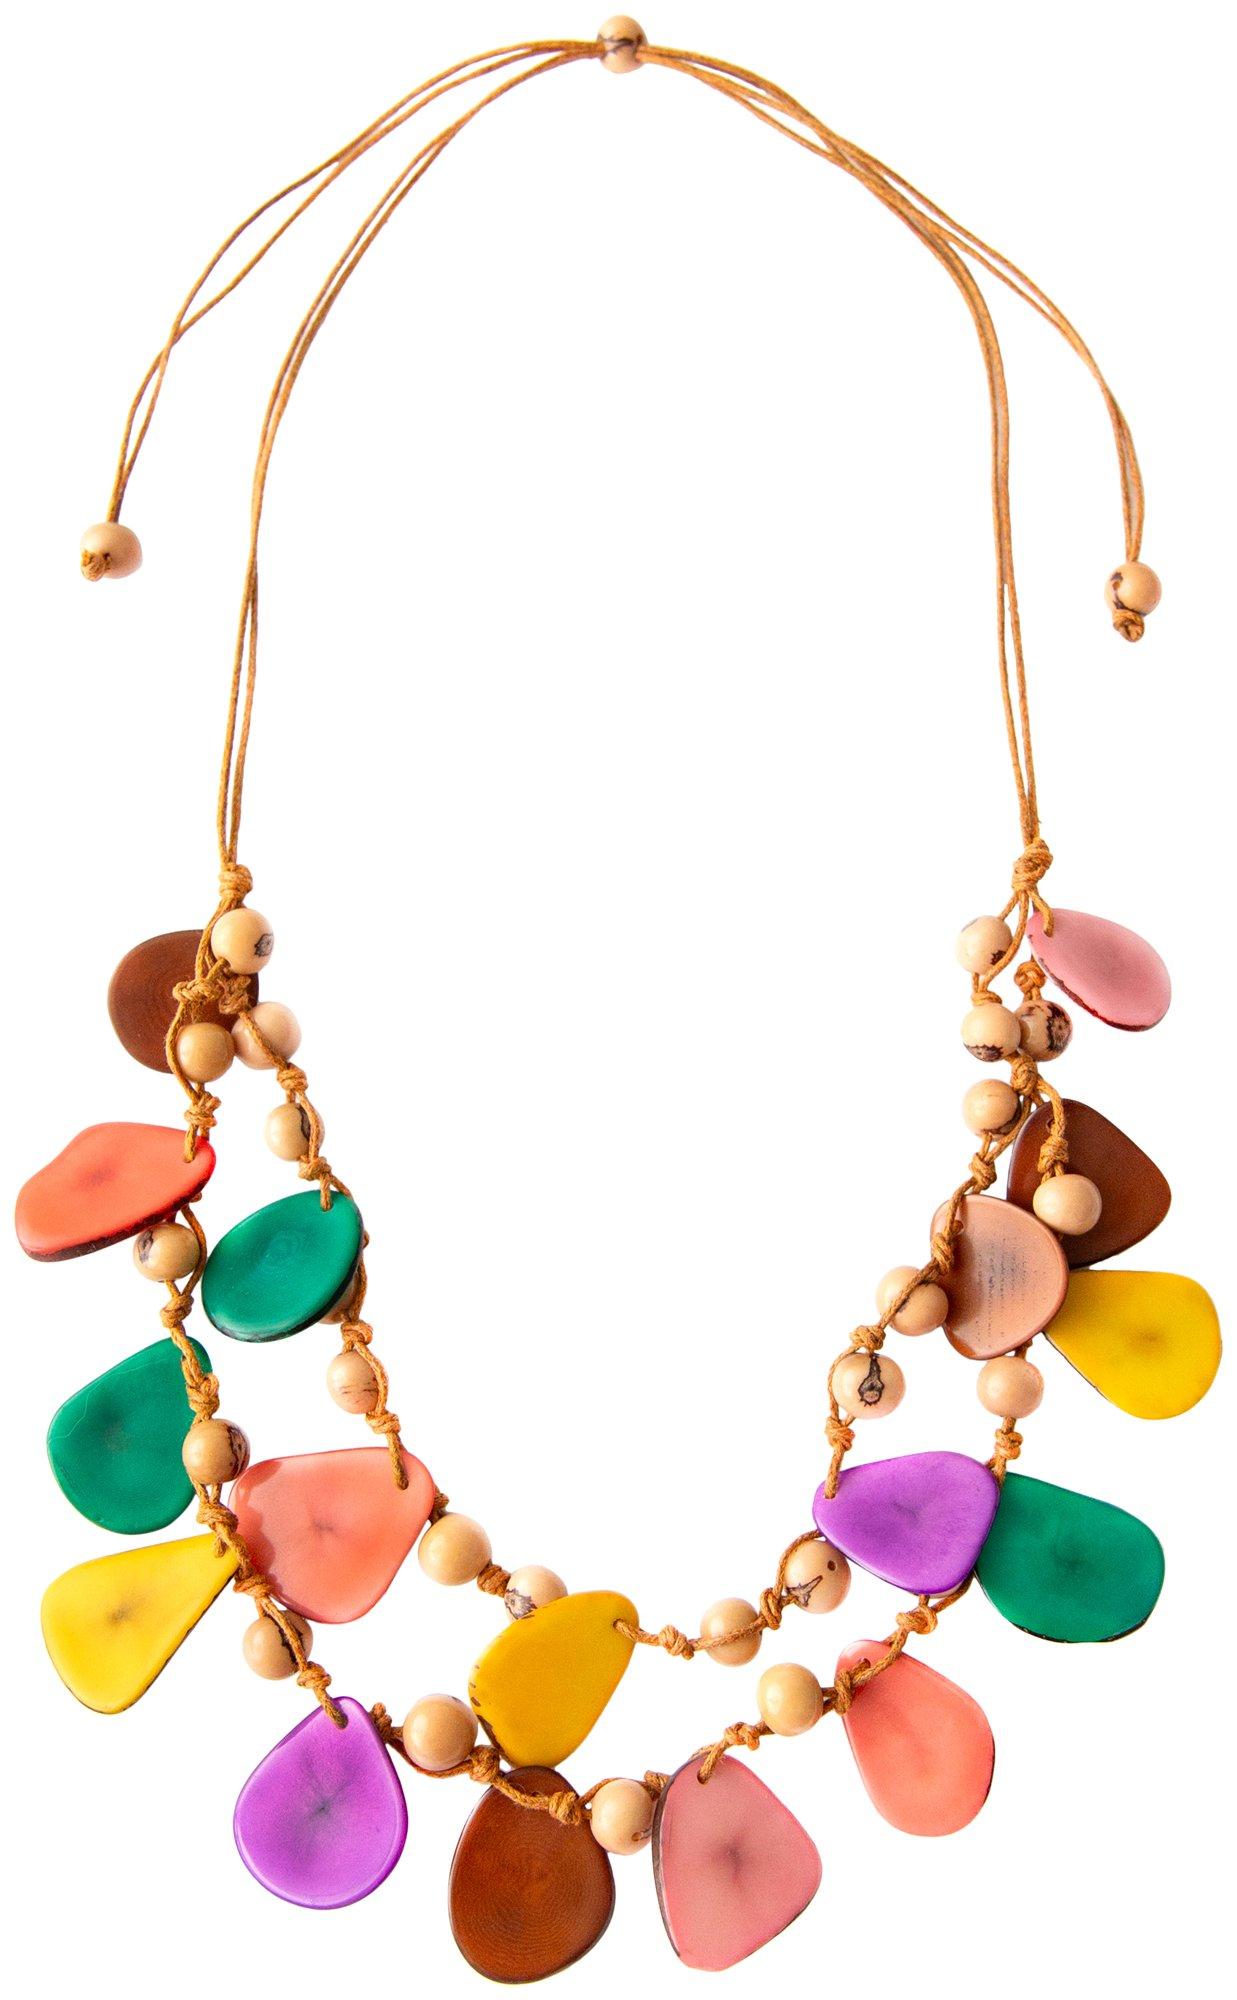 Tagua 2-Row 20 In. Multi-Colored Adjustable Necklace